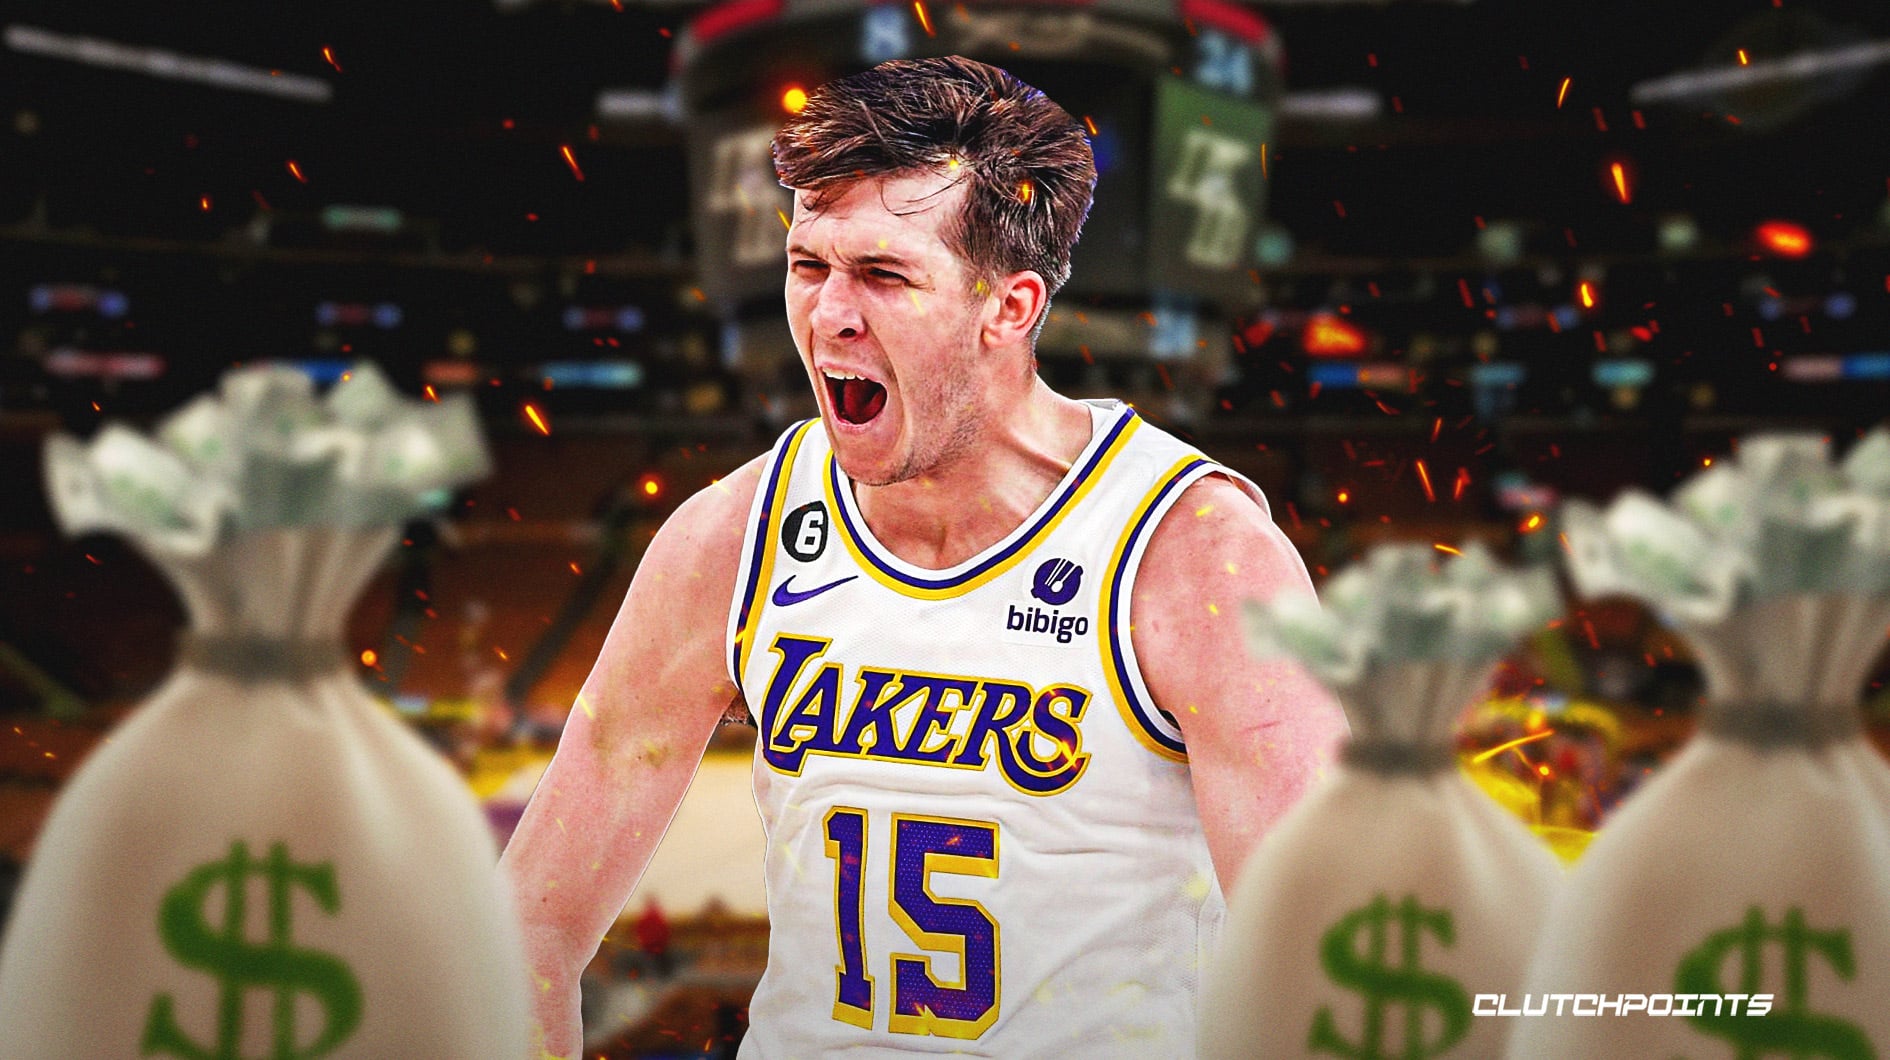 Nba Rumors Lakers True Feelings On Austin Reaves Ahead Of Potential 100 Million Contract Offer 